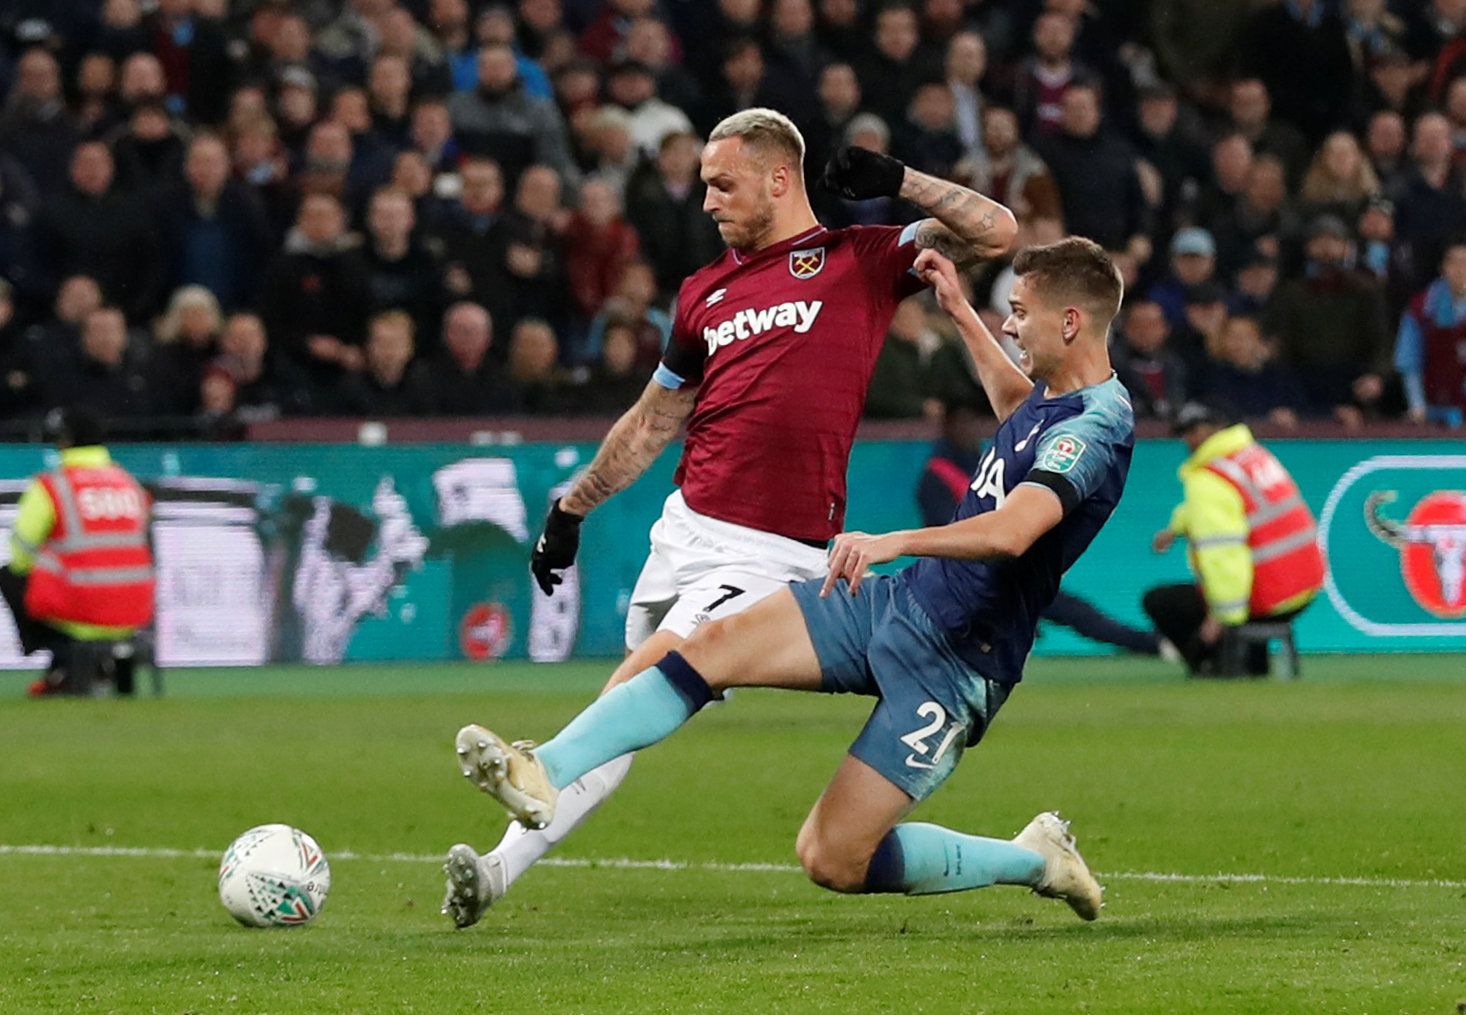 Soccer Football - Carabao Cup Fourth Round - West Ham United v Tottenham Hotspur - London Stadium, London, Britain - October 31, 2018  Tottenham's Juan Foyth blocks a shot from West Ham's Marko Arnautovic     Action Images via Reuters/Matthew Childs  EDITORIAL USE ONLY. No use with unauthorized audio, video, data, fixture lists, club/league logos or 